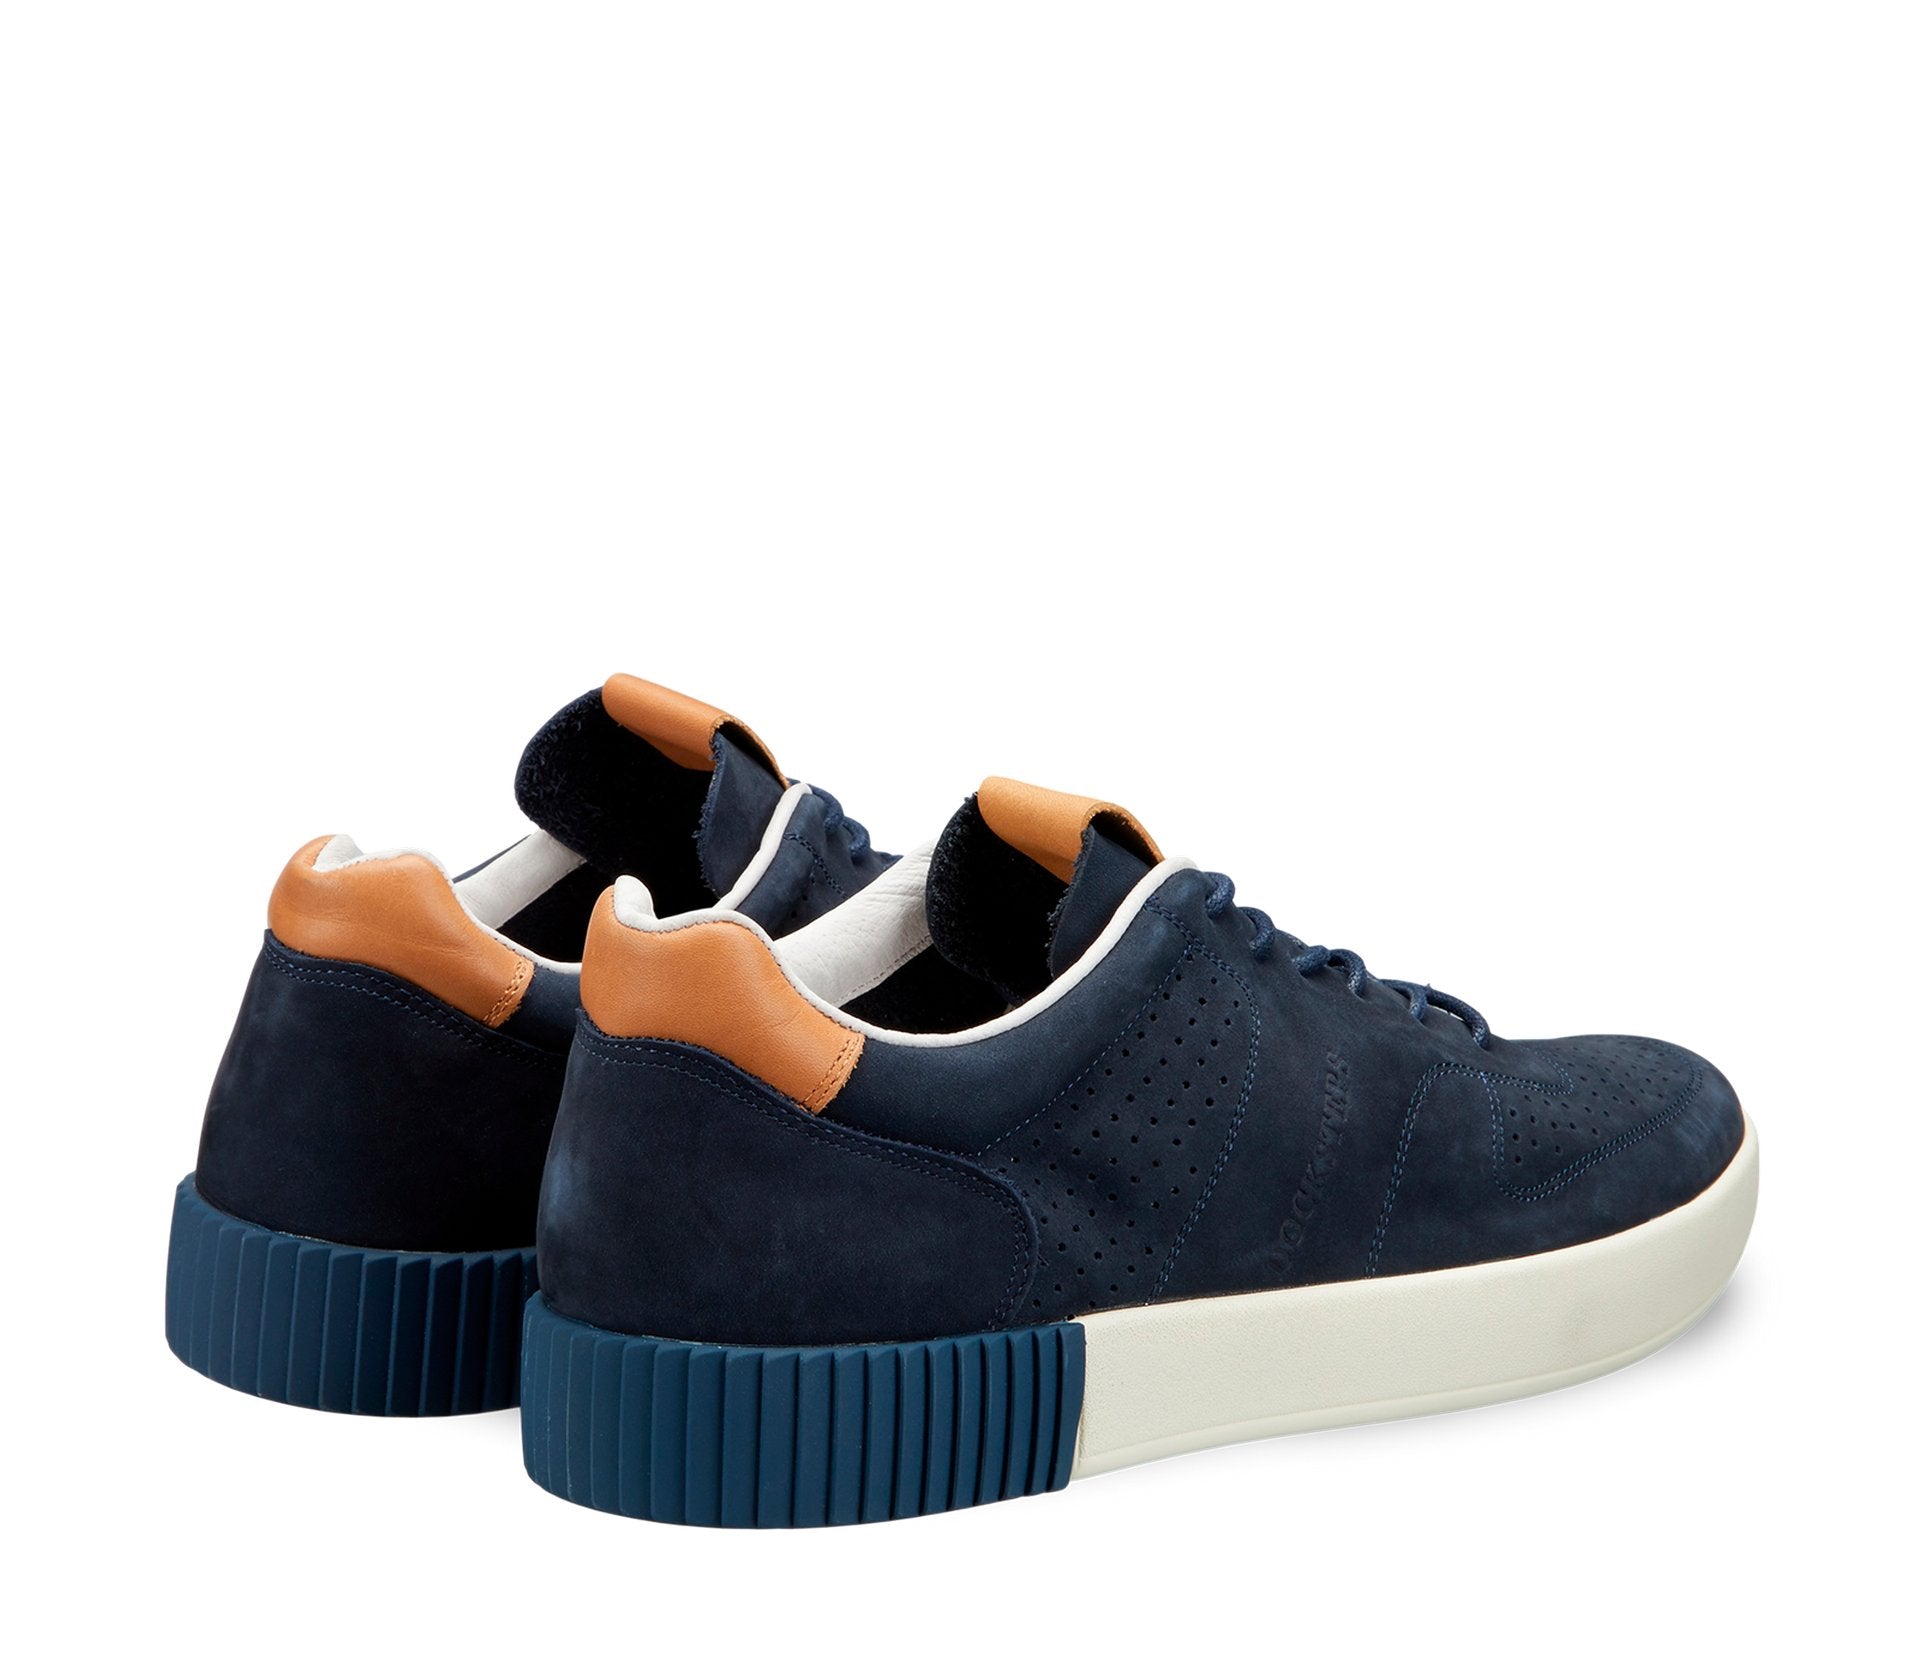 Docksteps men's trainers in nubuck/leather and box sole